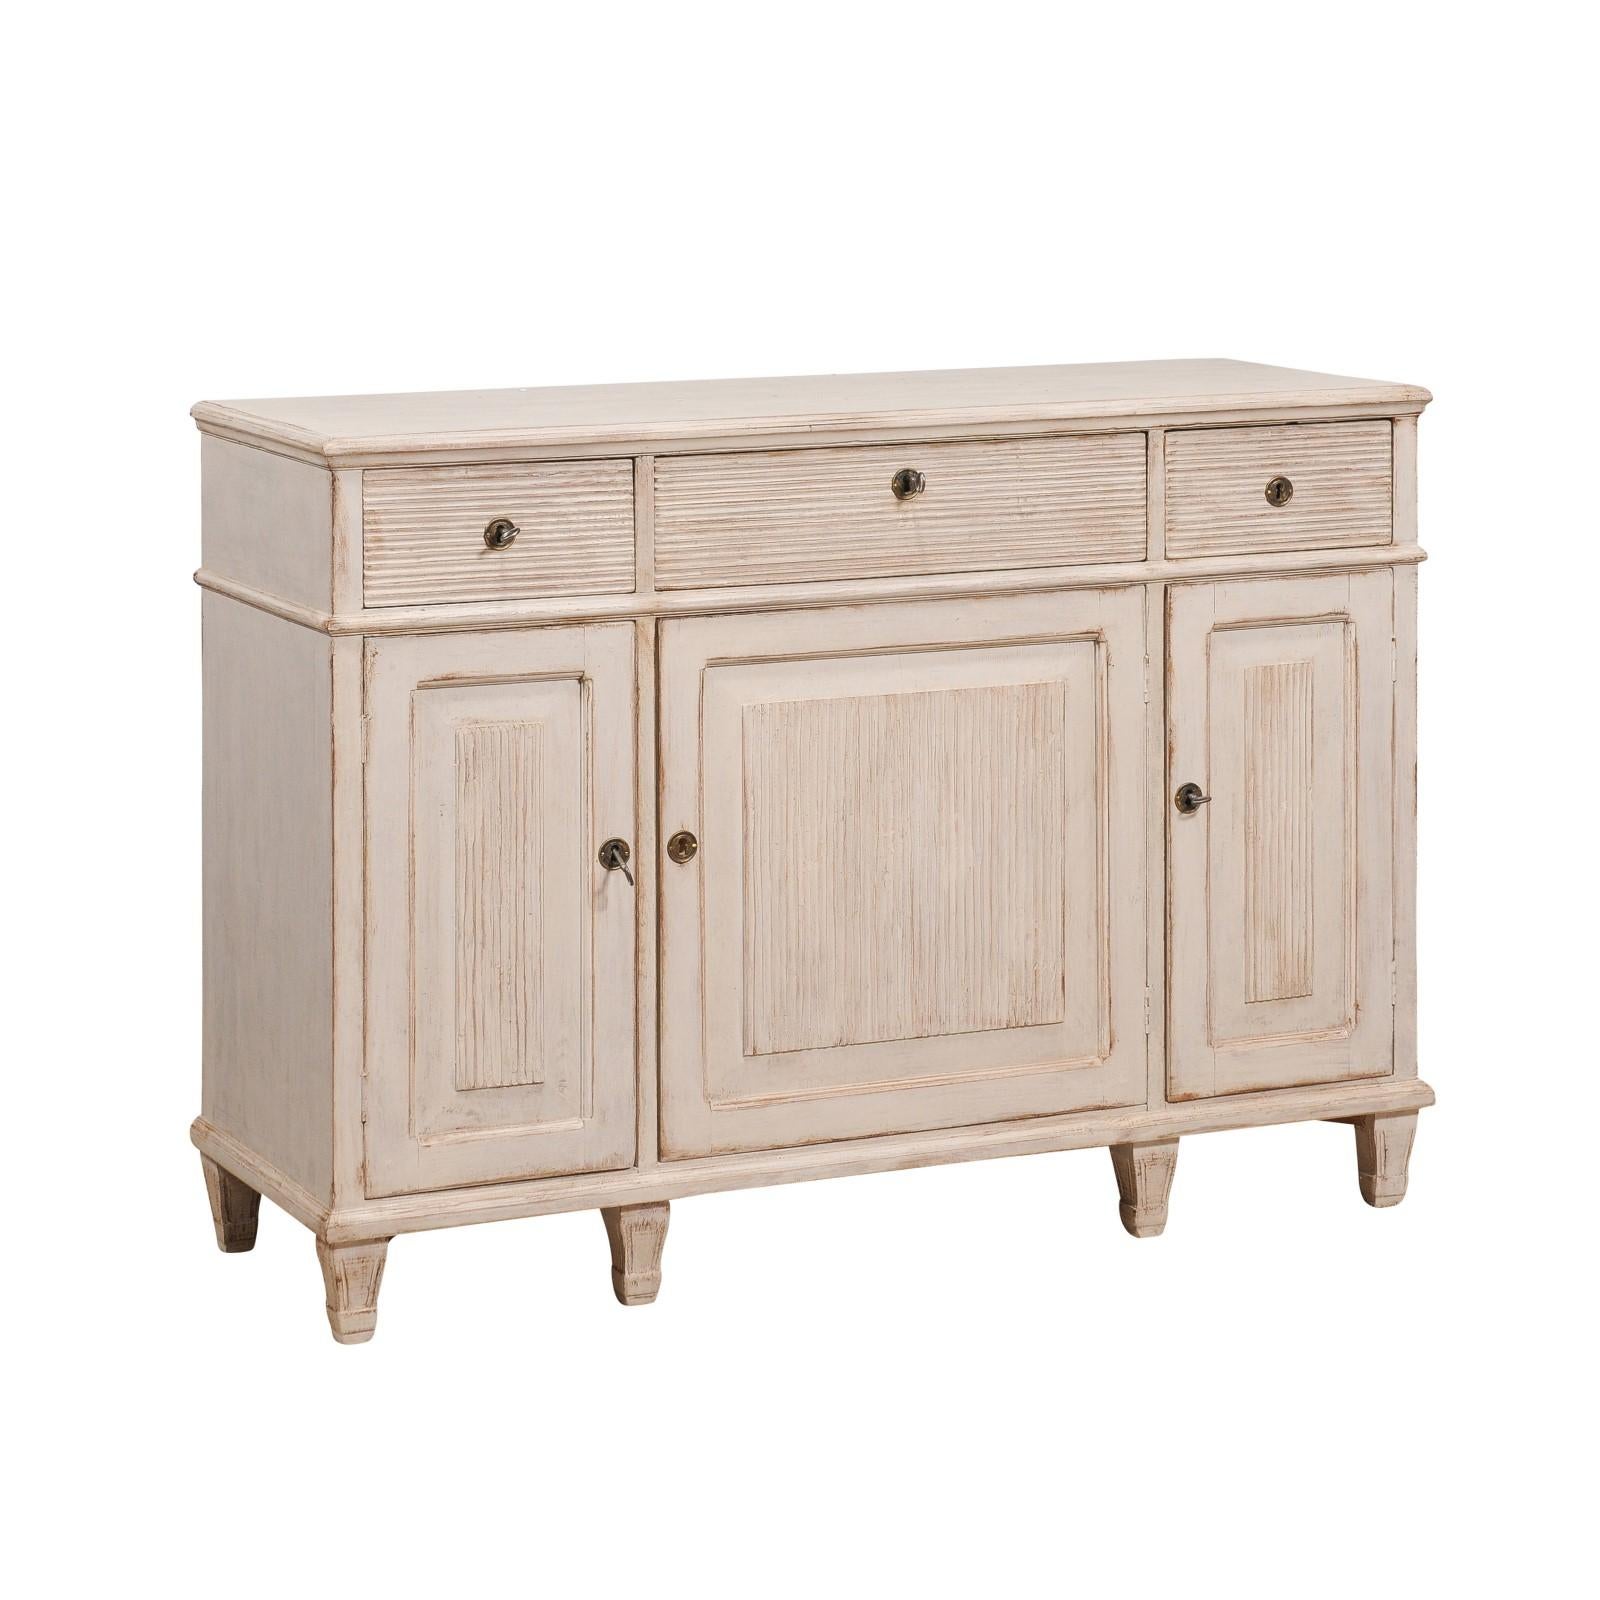 A Swedish Gustavian style sideboard from circa 1860 with light creamy gray painted finish, three drawers over three doors and carved reeded panels. This Swedish Gustavian style sideboard from circa 1860 exudes the elegance and refined simplicity